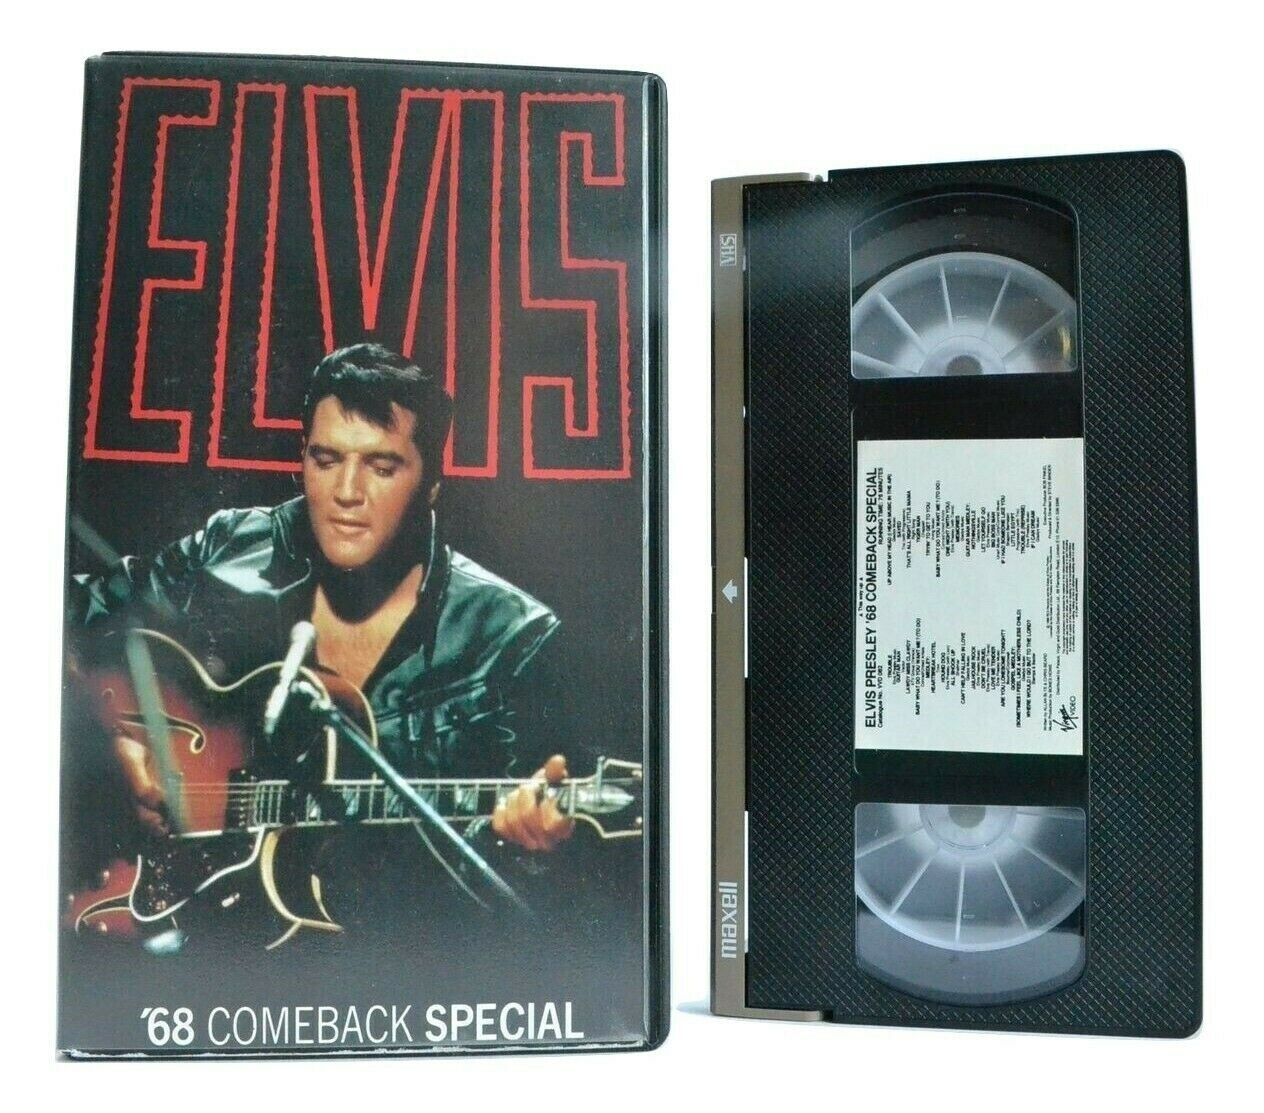 Elvis Presley: '68 Comeback Special - Live Performance - Rock And Roll - Pal VHS-